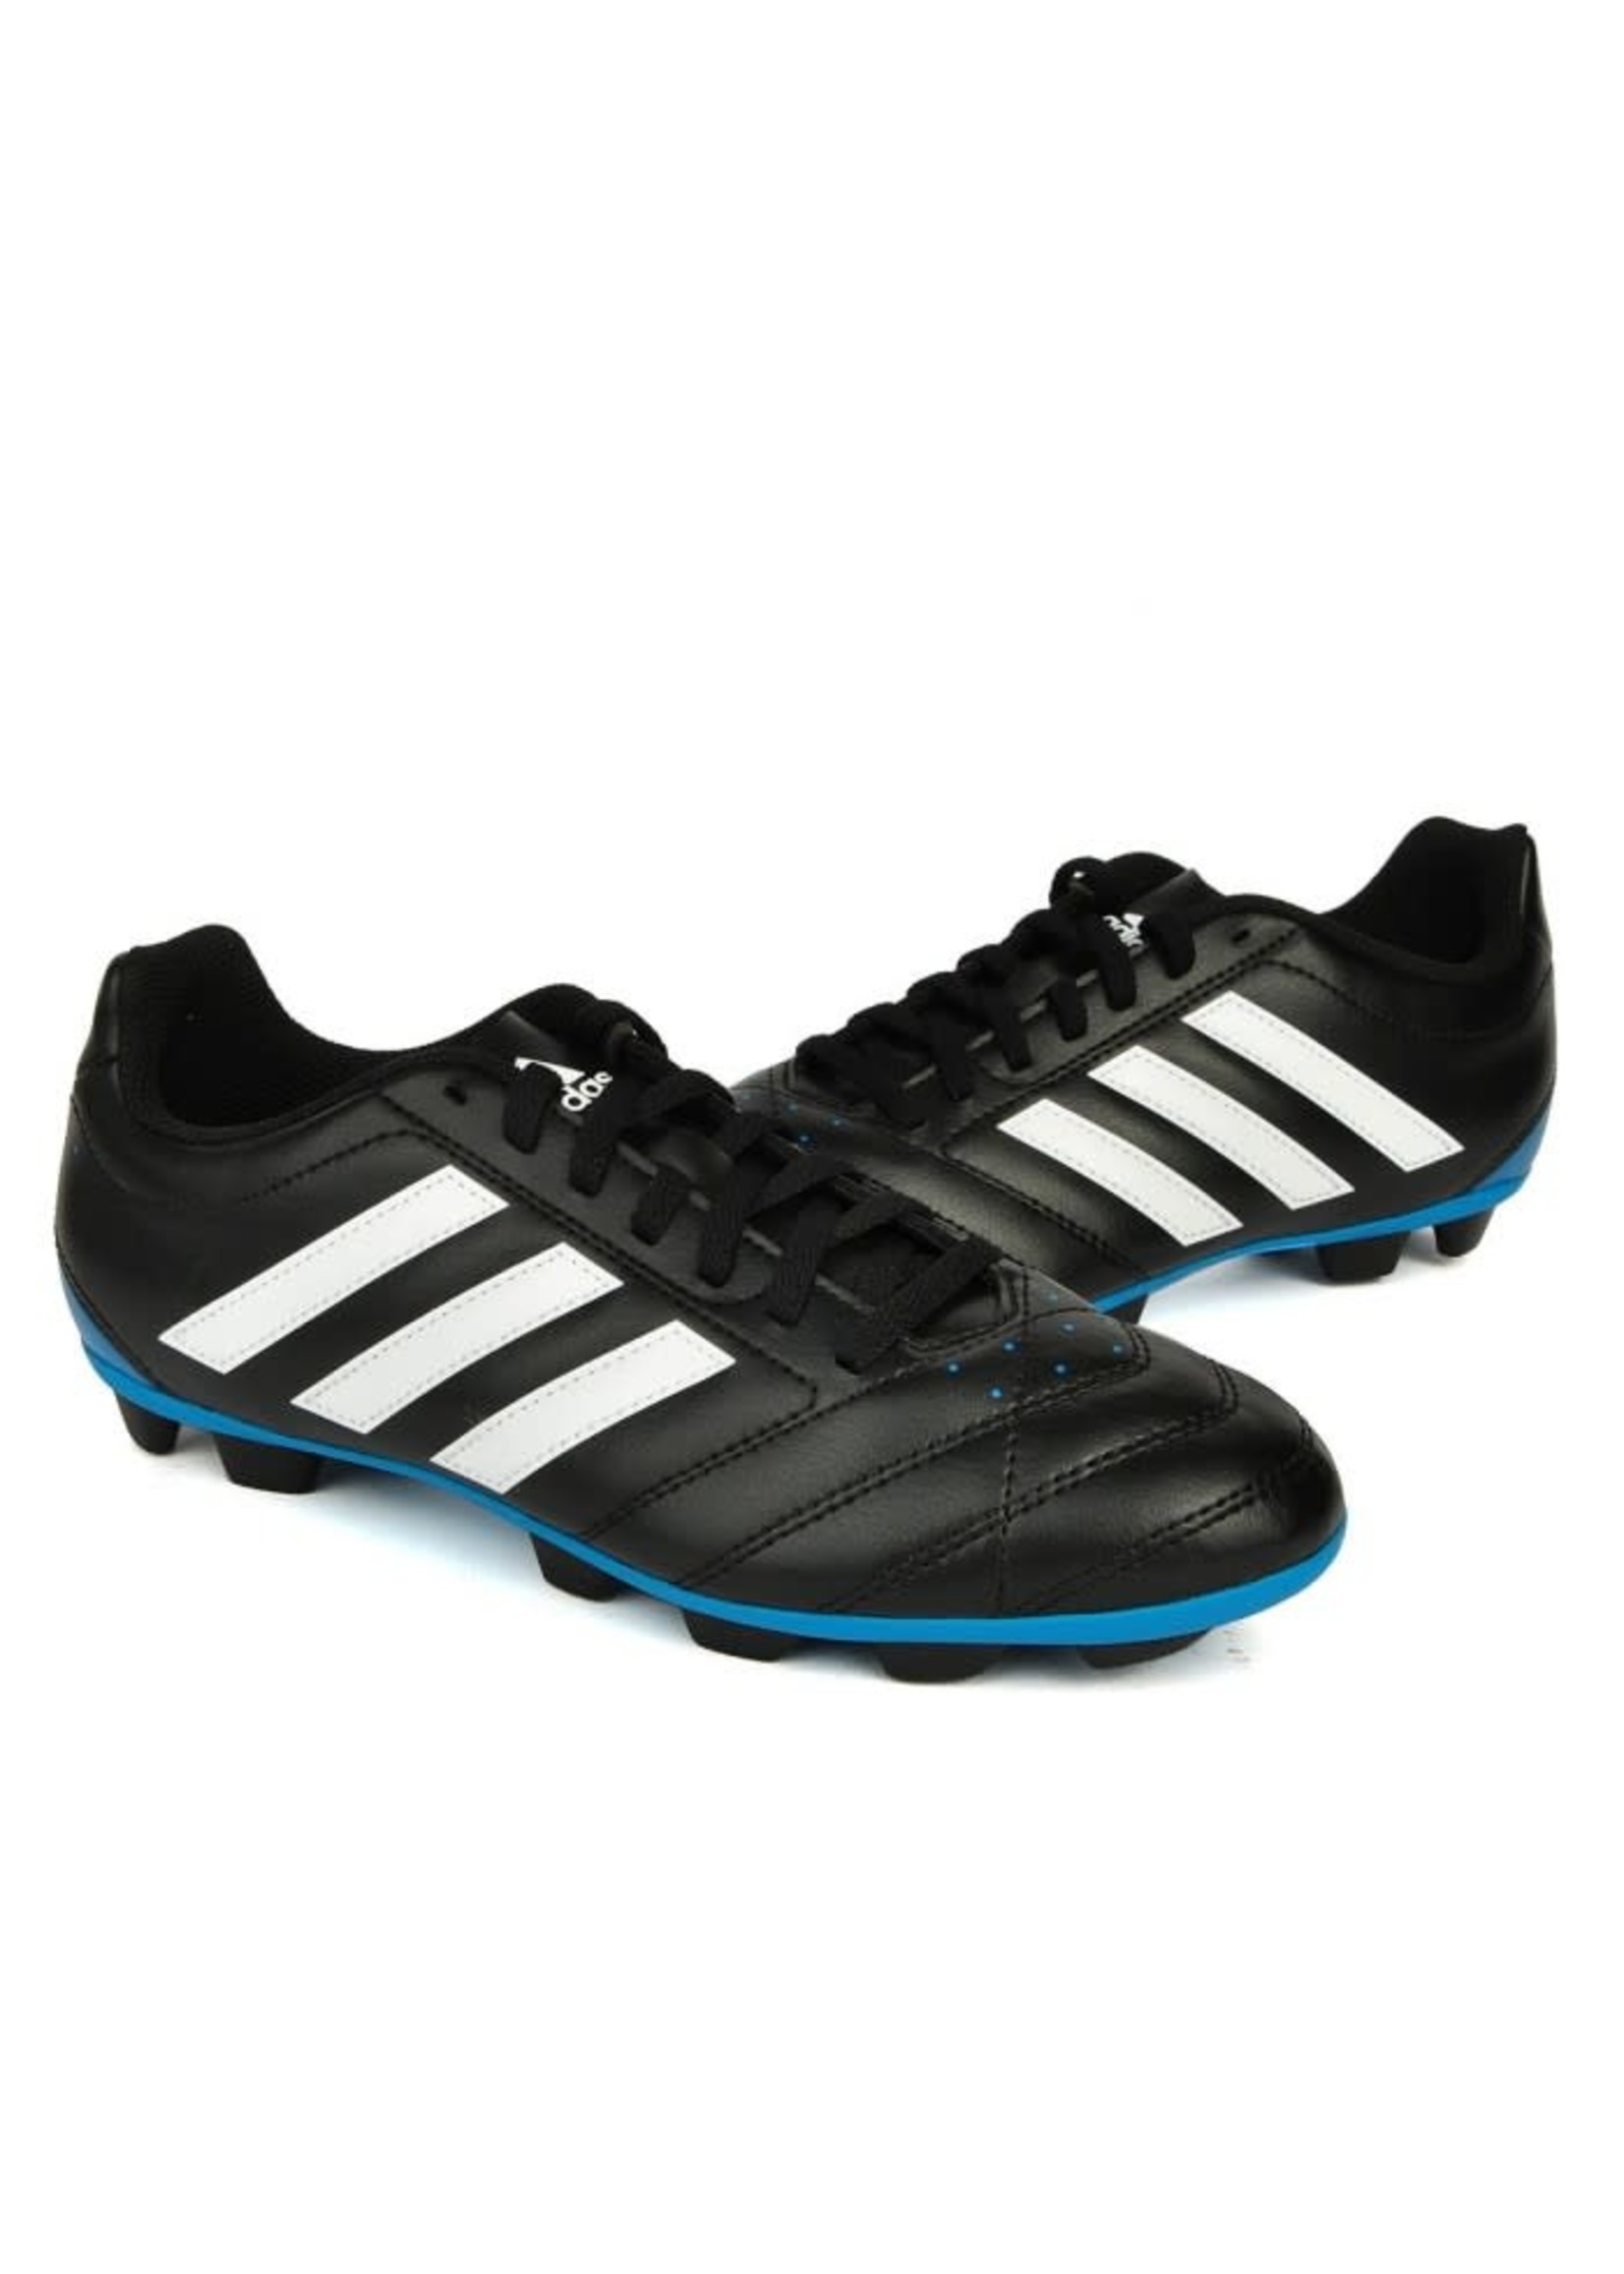 ADIDAS ADIDAS GOLETTO V J SOCCER CLEATS B35102 - Cheap Excellence